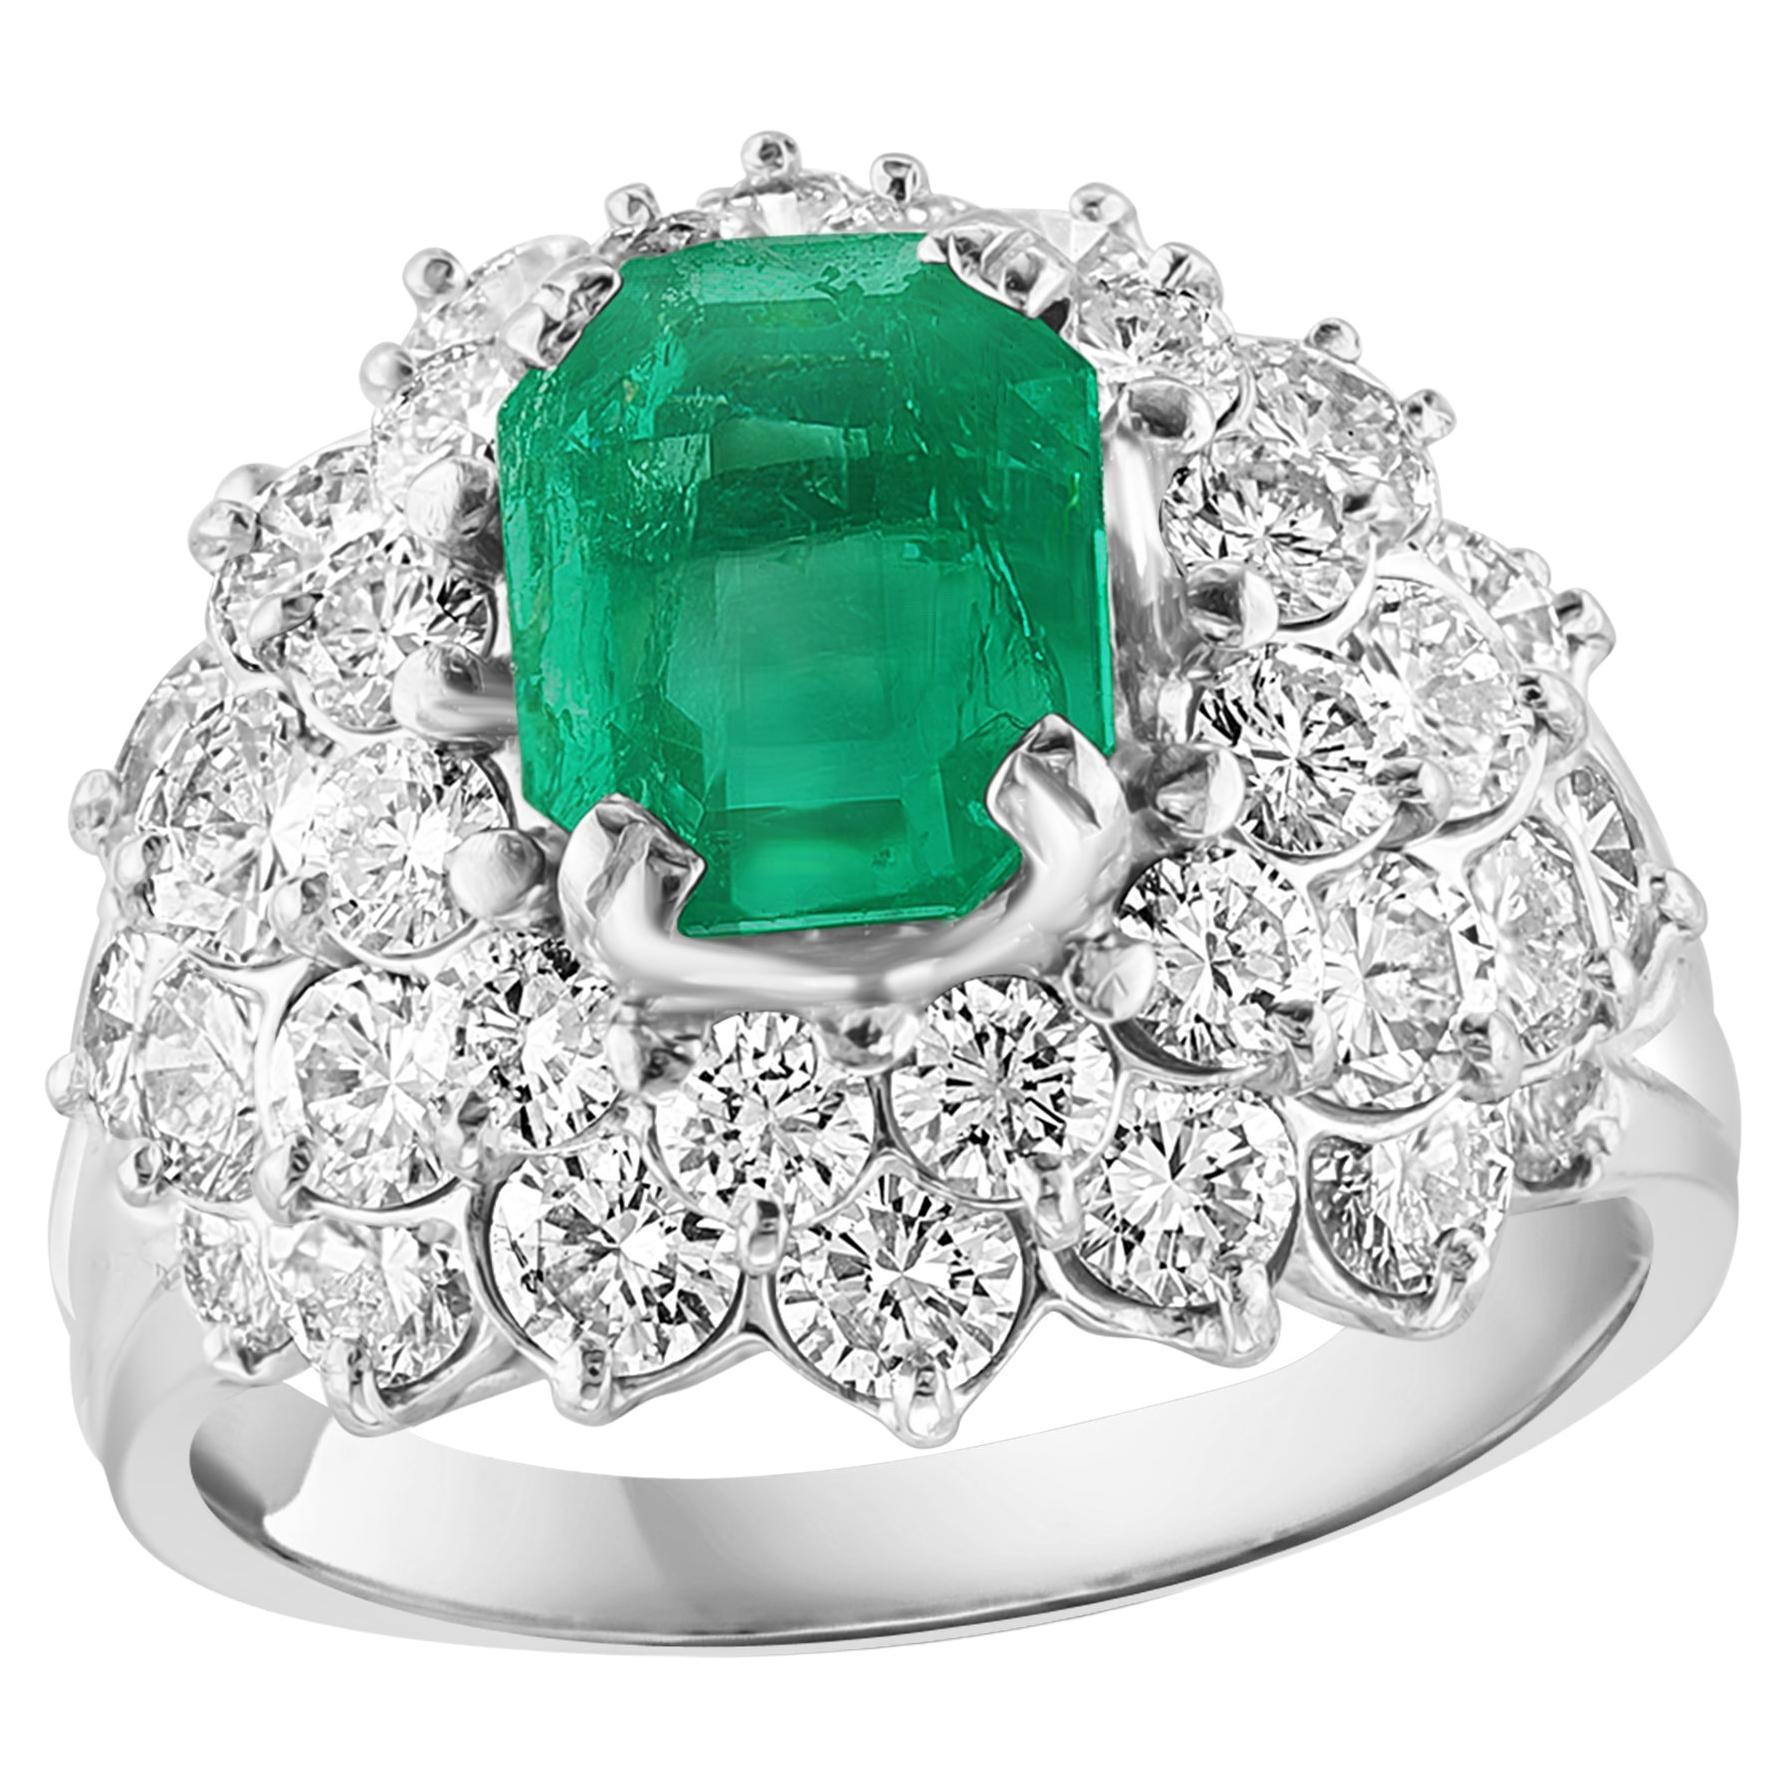 GIA Certified 2.5ct Emerald Cut Colombian Emerald Diamond Ring 18kt White Gold For Sale